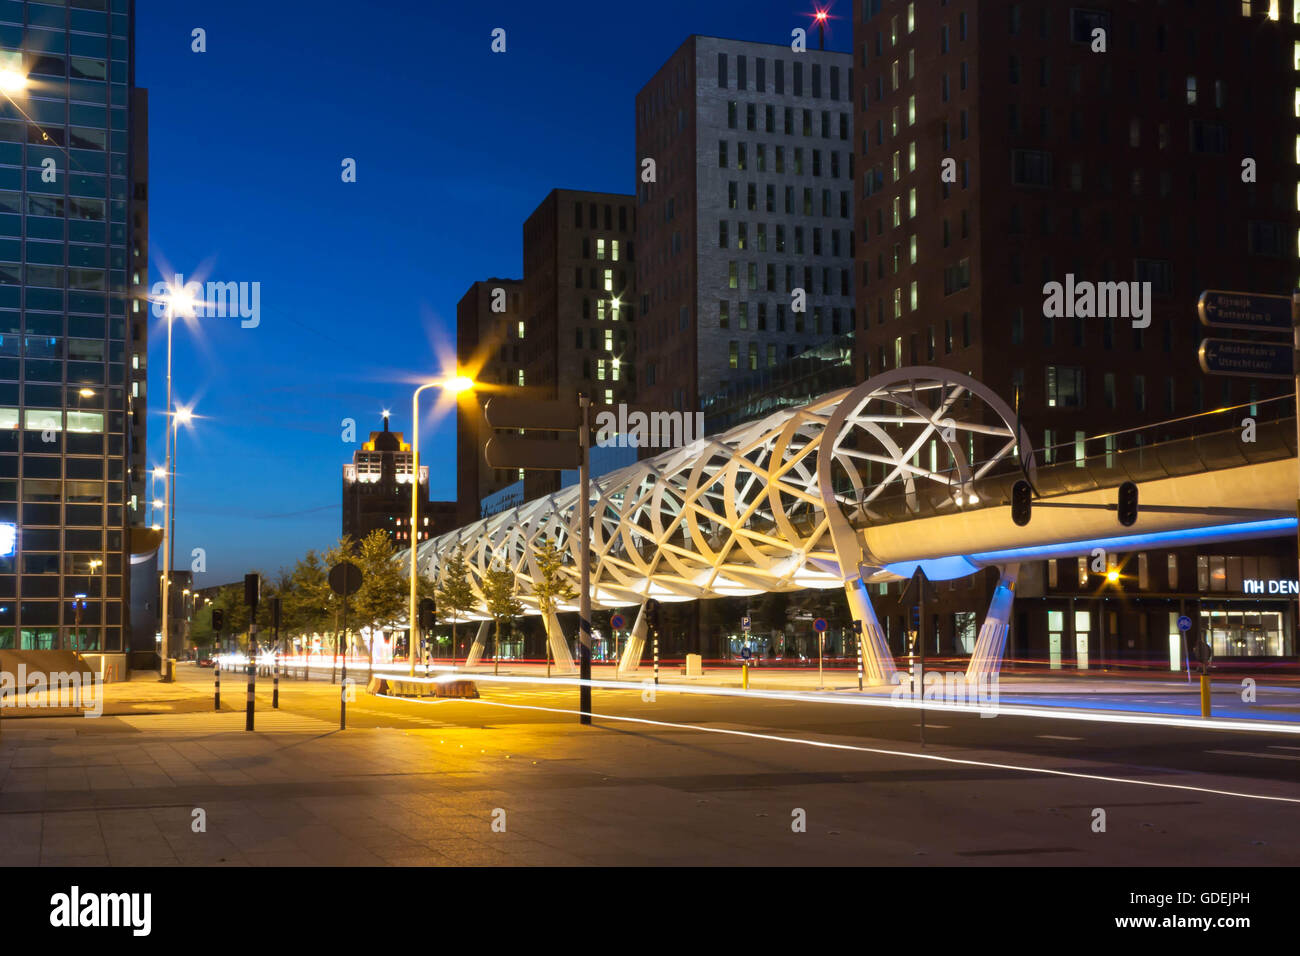 Randstadrail public transport network and cityscape, The Hague, Holland Stock Photo